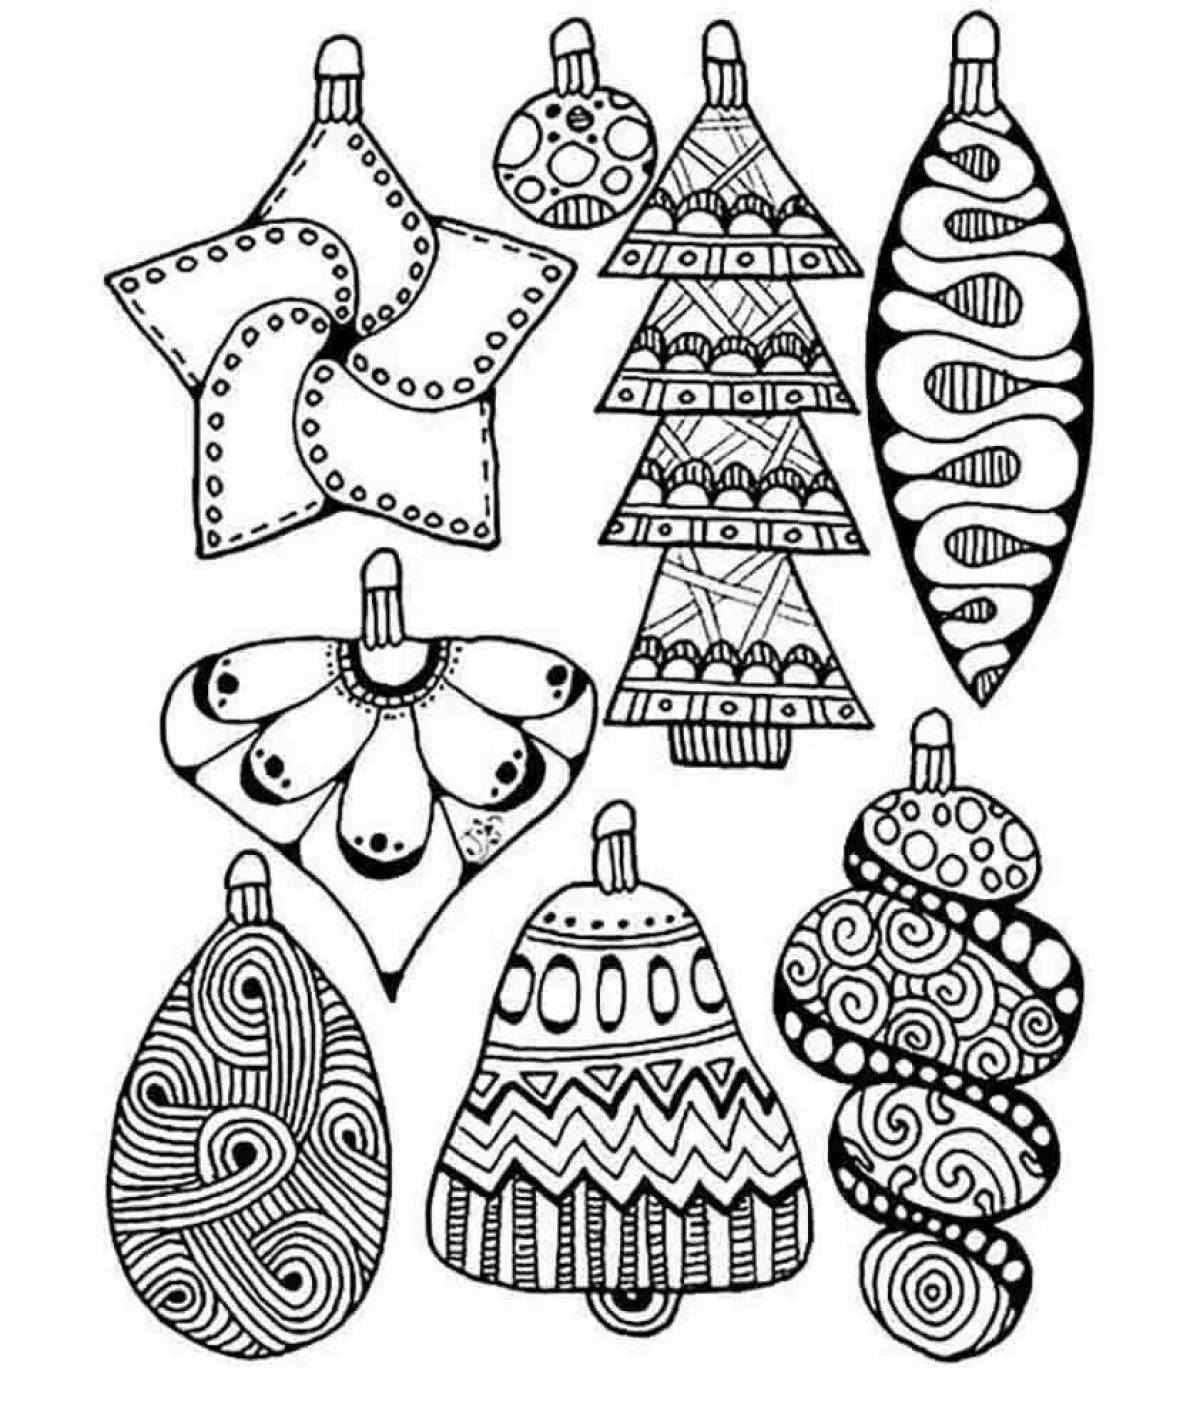 Amazing coloring pages with Christmas patterns